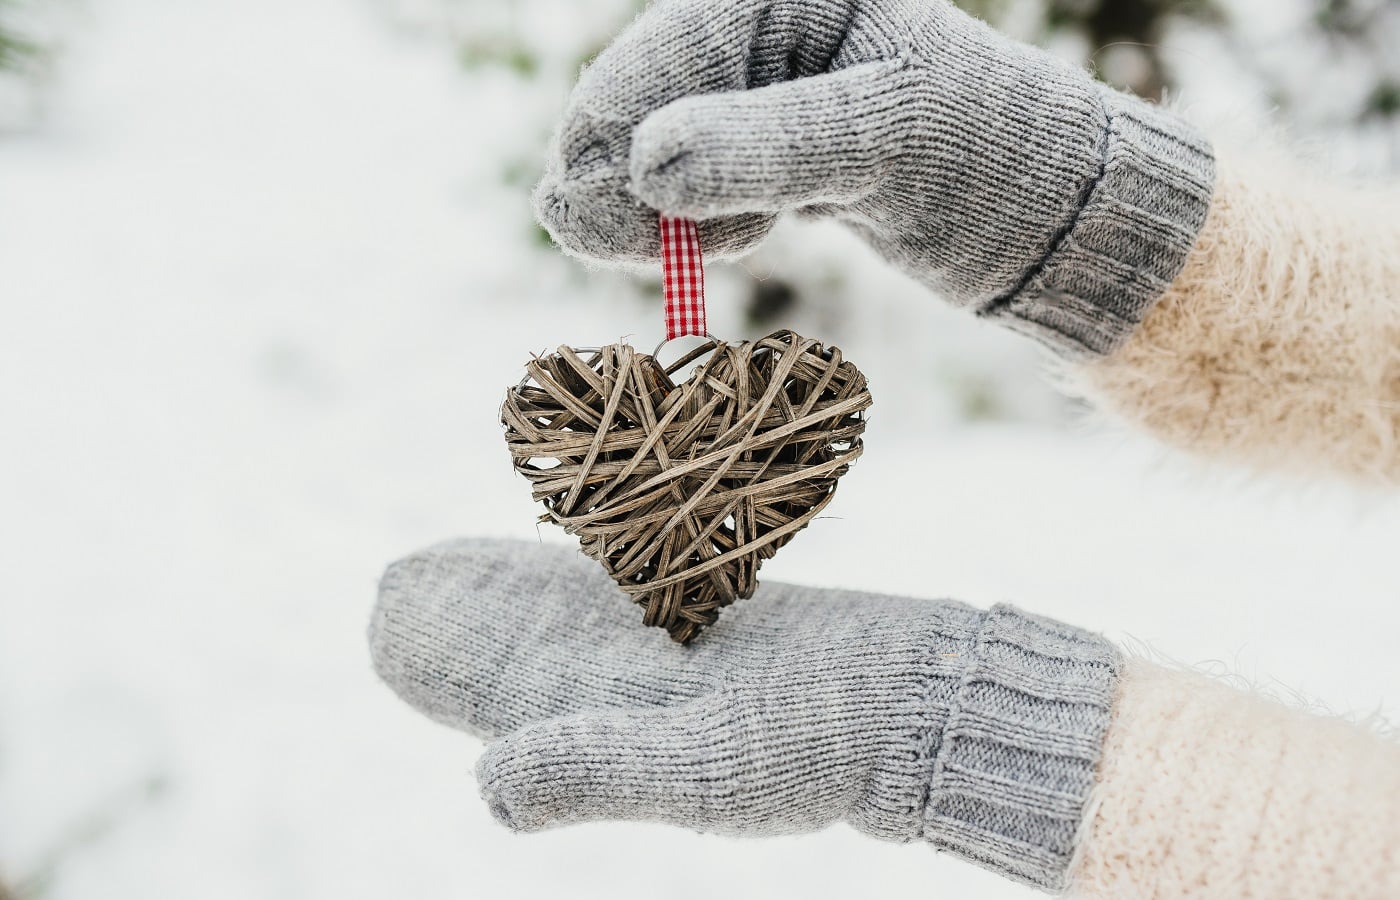 Warmest Mittens Buyer’s Guide love and St. Valentine concept.